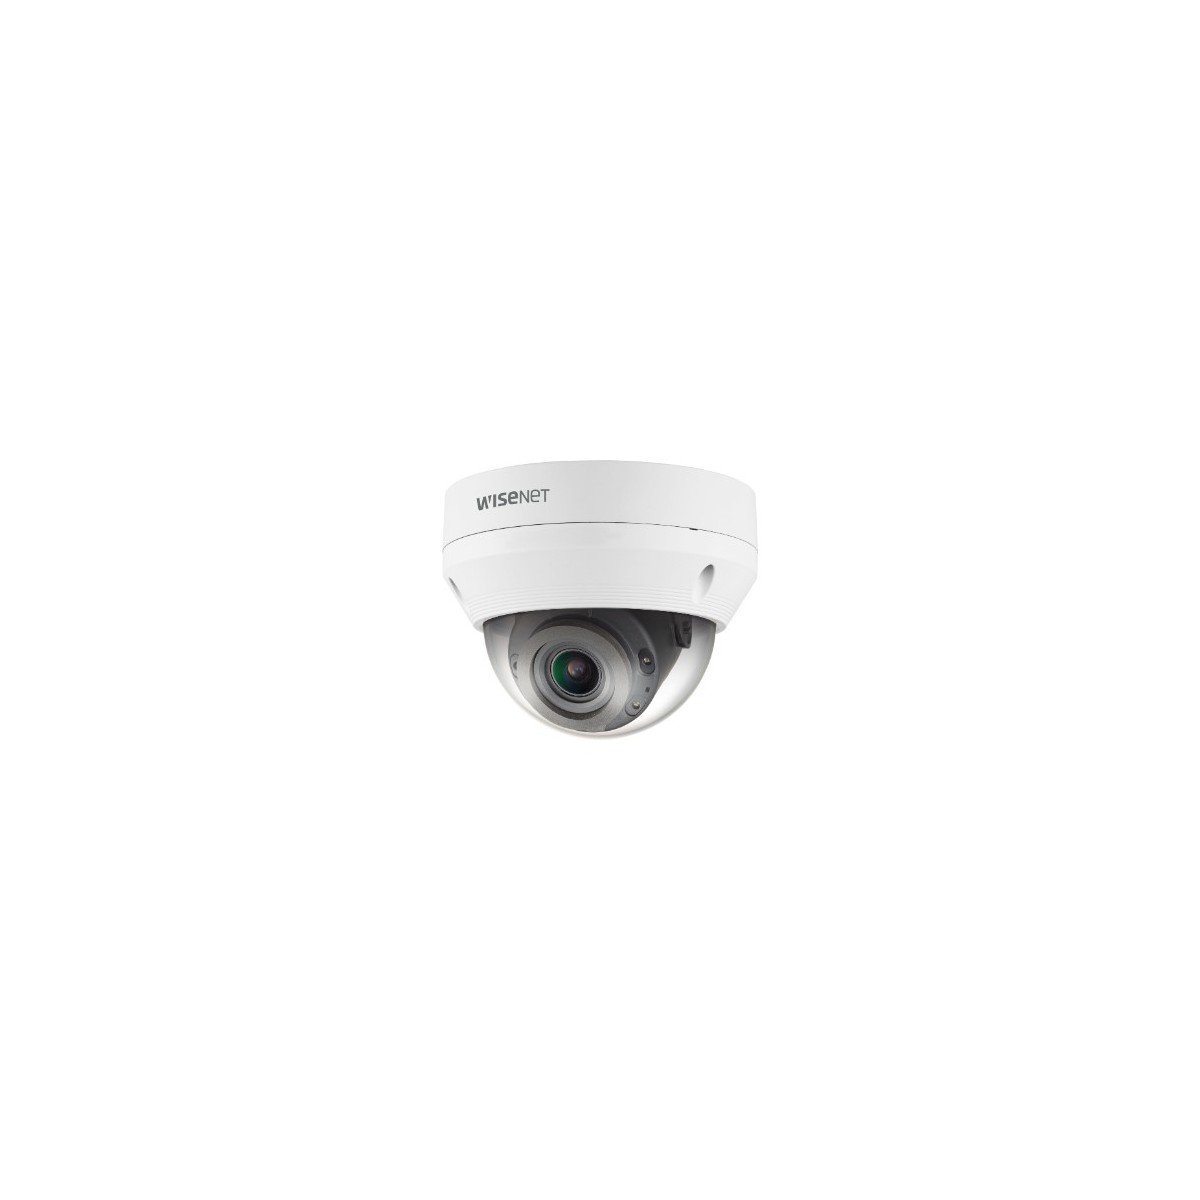 Hanwha Techwin Hanwha QNV-8080R - IP security camera - Outdoor - Wired - Simplified Chinese - Traditional Chinese - Czech - Germ